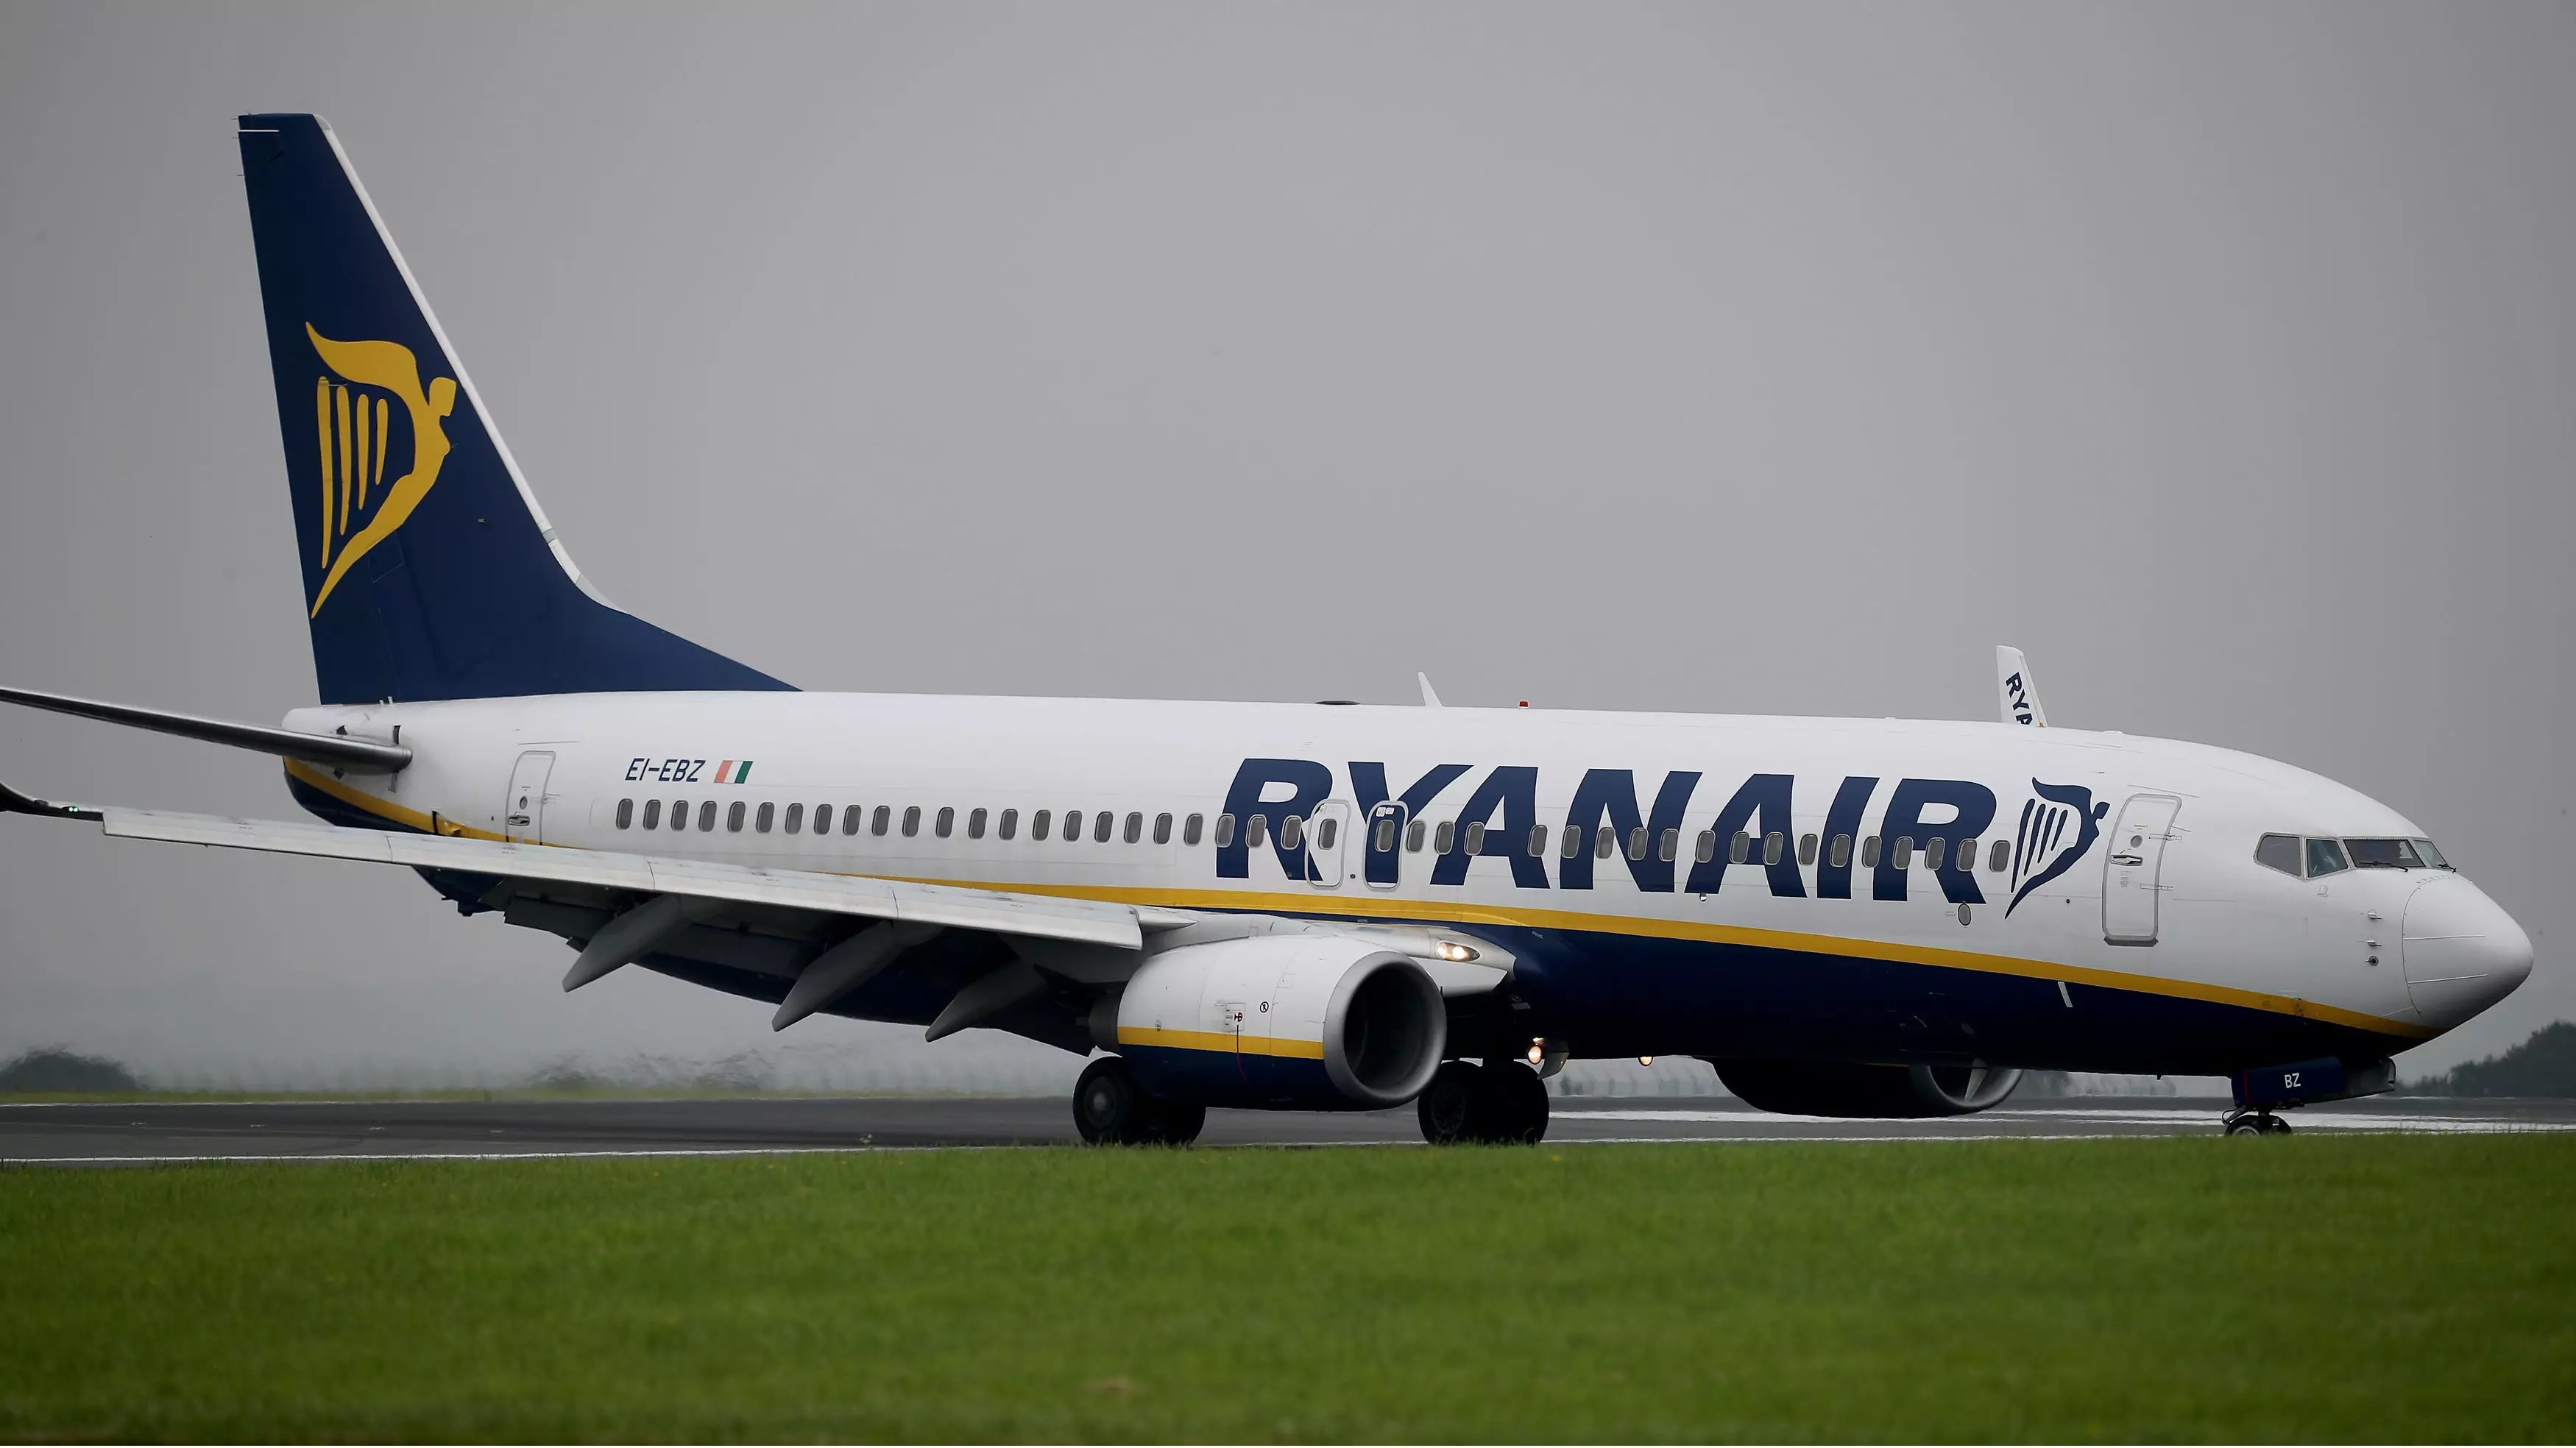 Ryanair's Flash Sale On Autumn Flights Sees Some Super-Cheap Prices